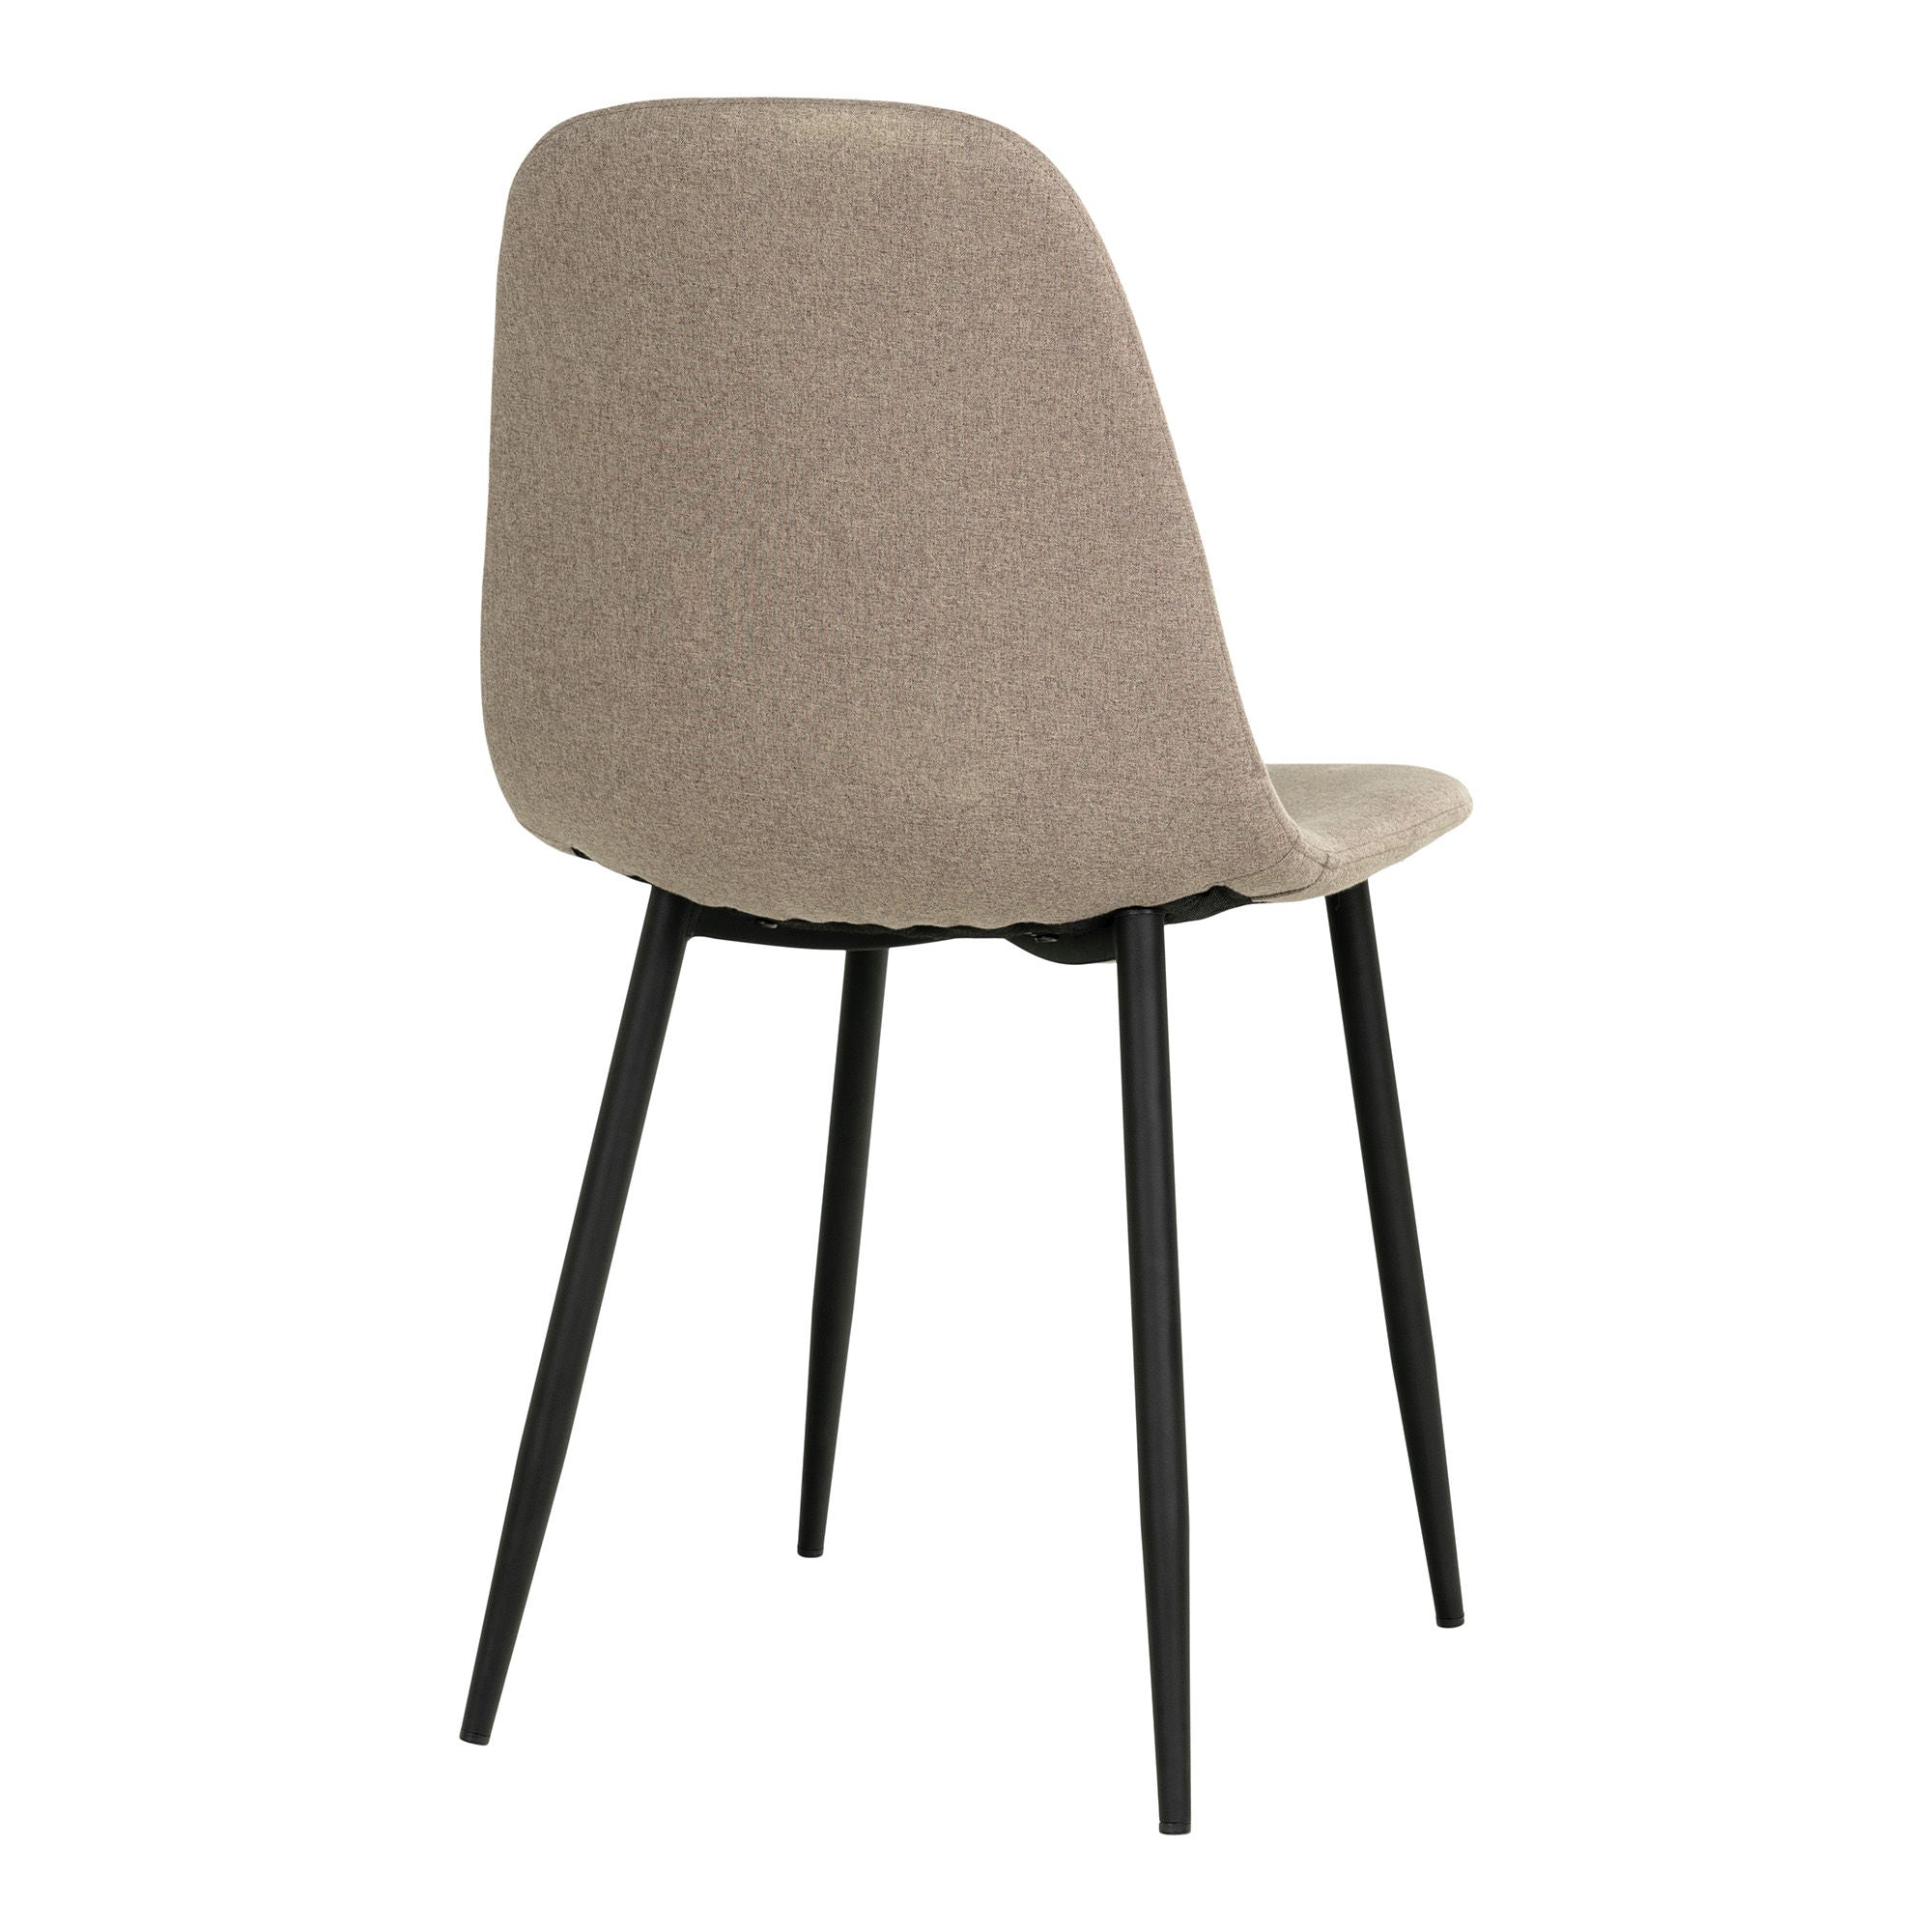 House Nordic Stockholm Dining Chair - Set of 2